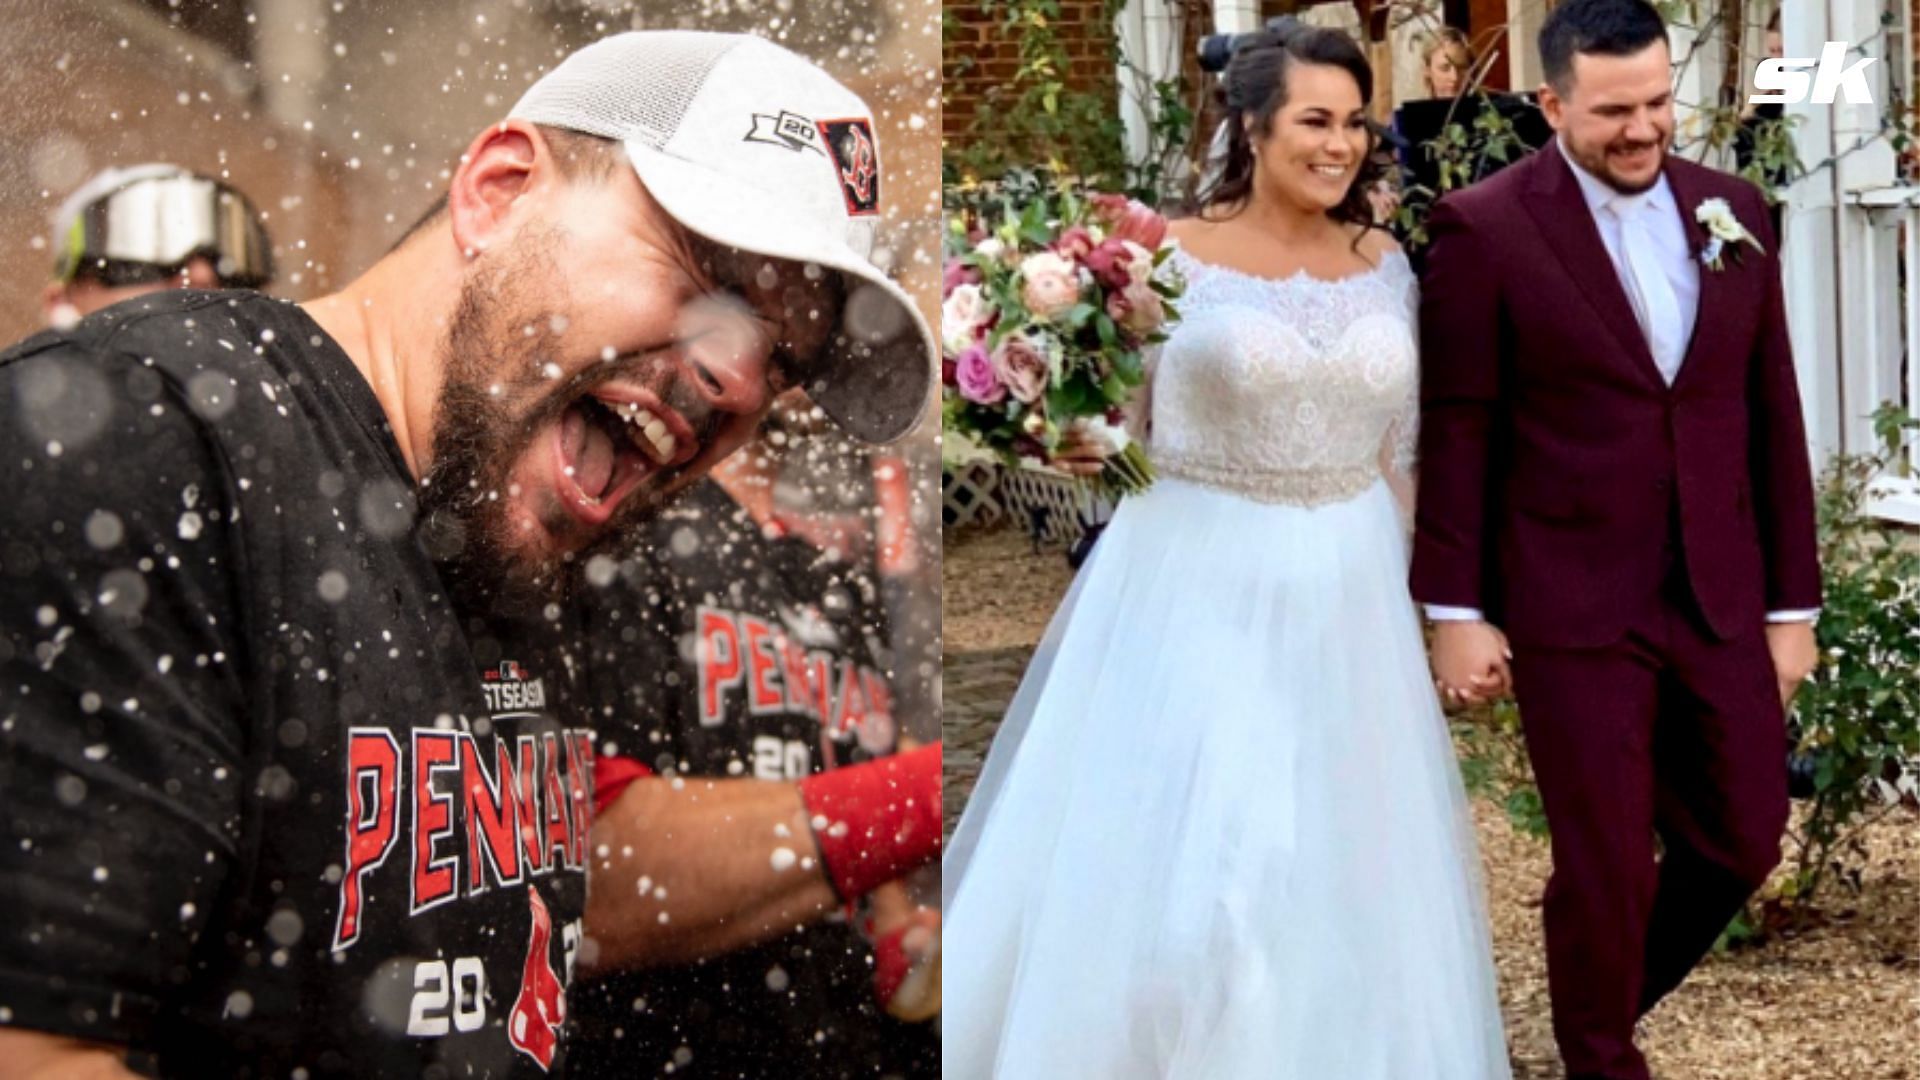 Cubs slugger Kyle Schwarber gets married to Paige Hartman - ABC7 Chicago